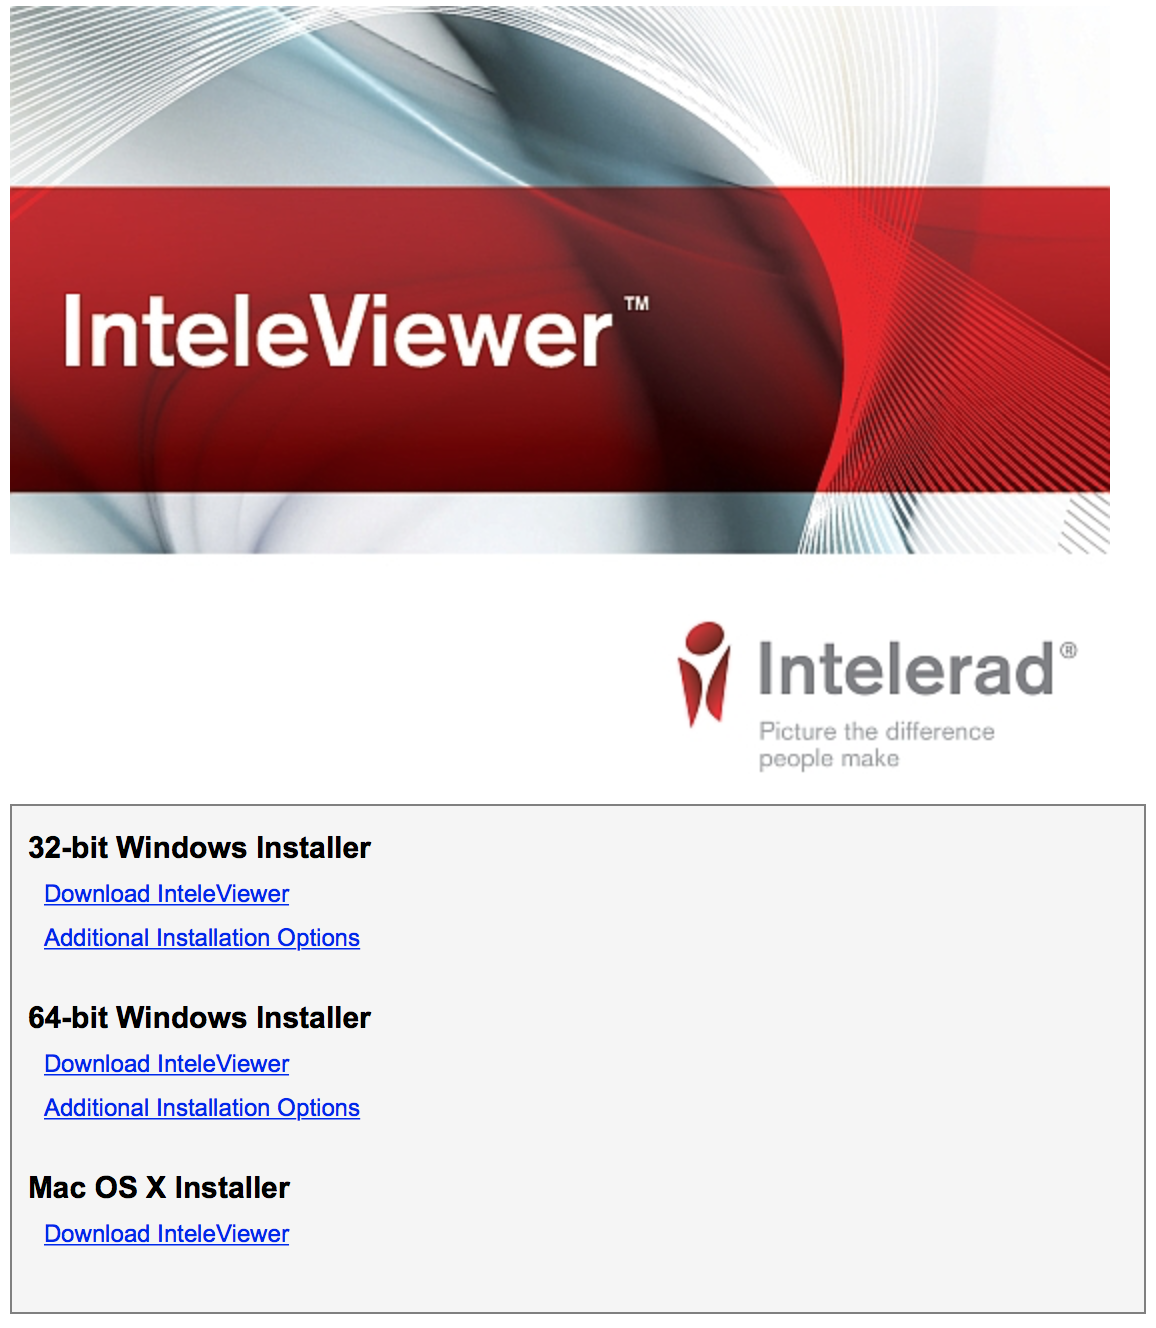 Download inteleviewer for windows act pro download